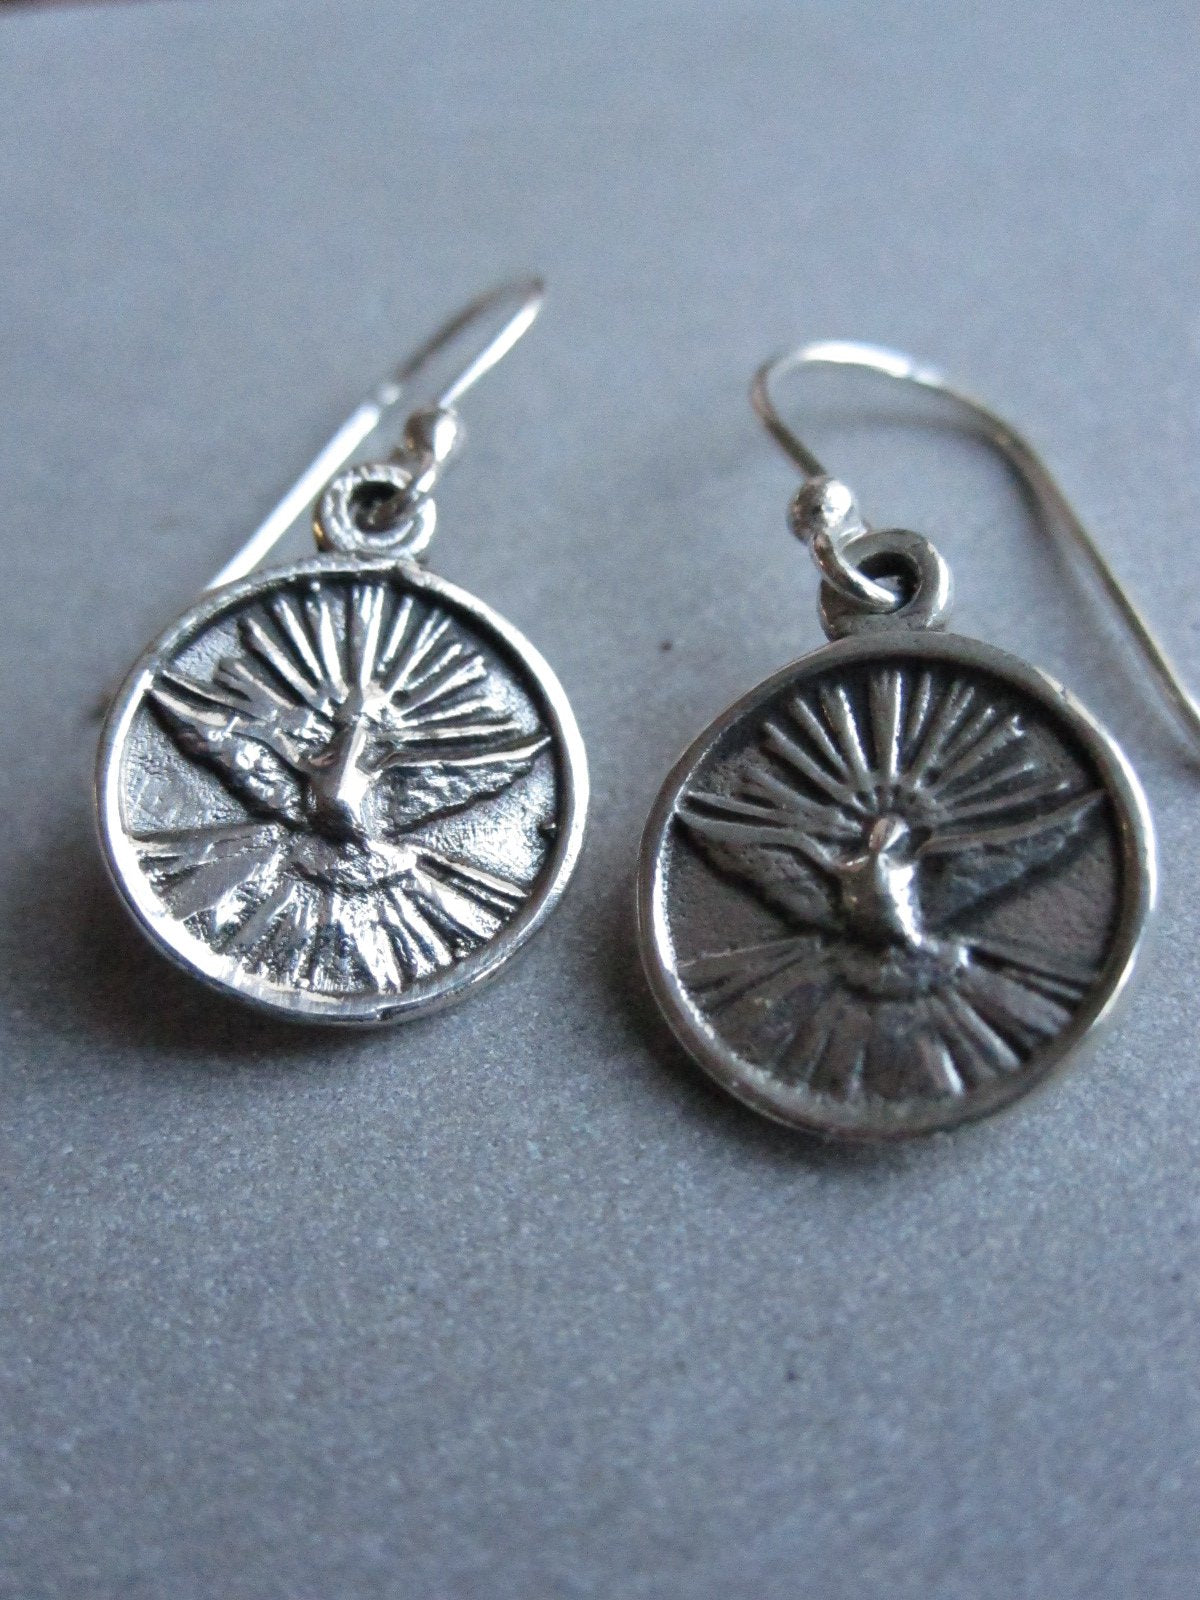 WDTS Dove of Peace Earrings